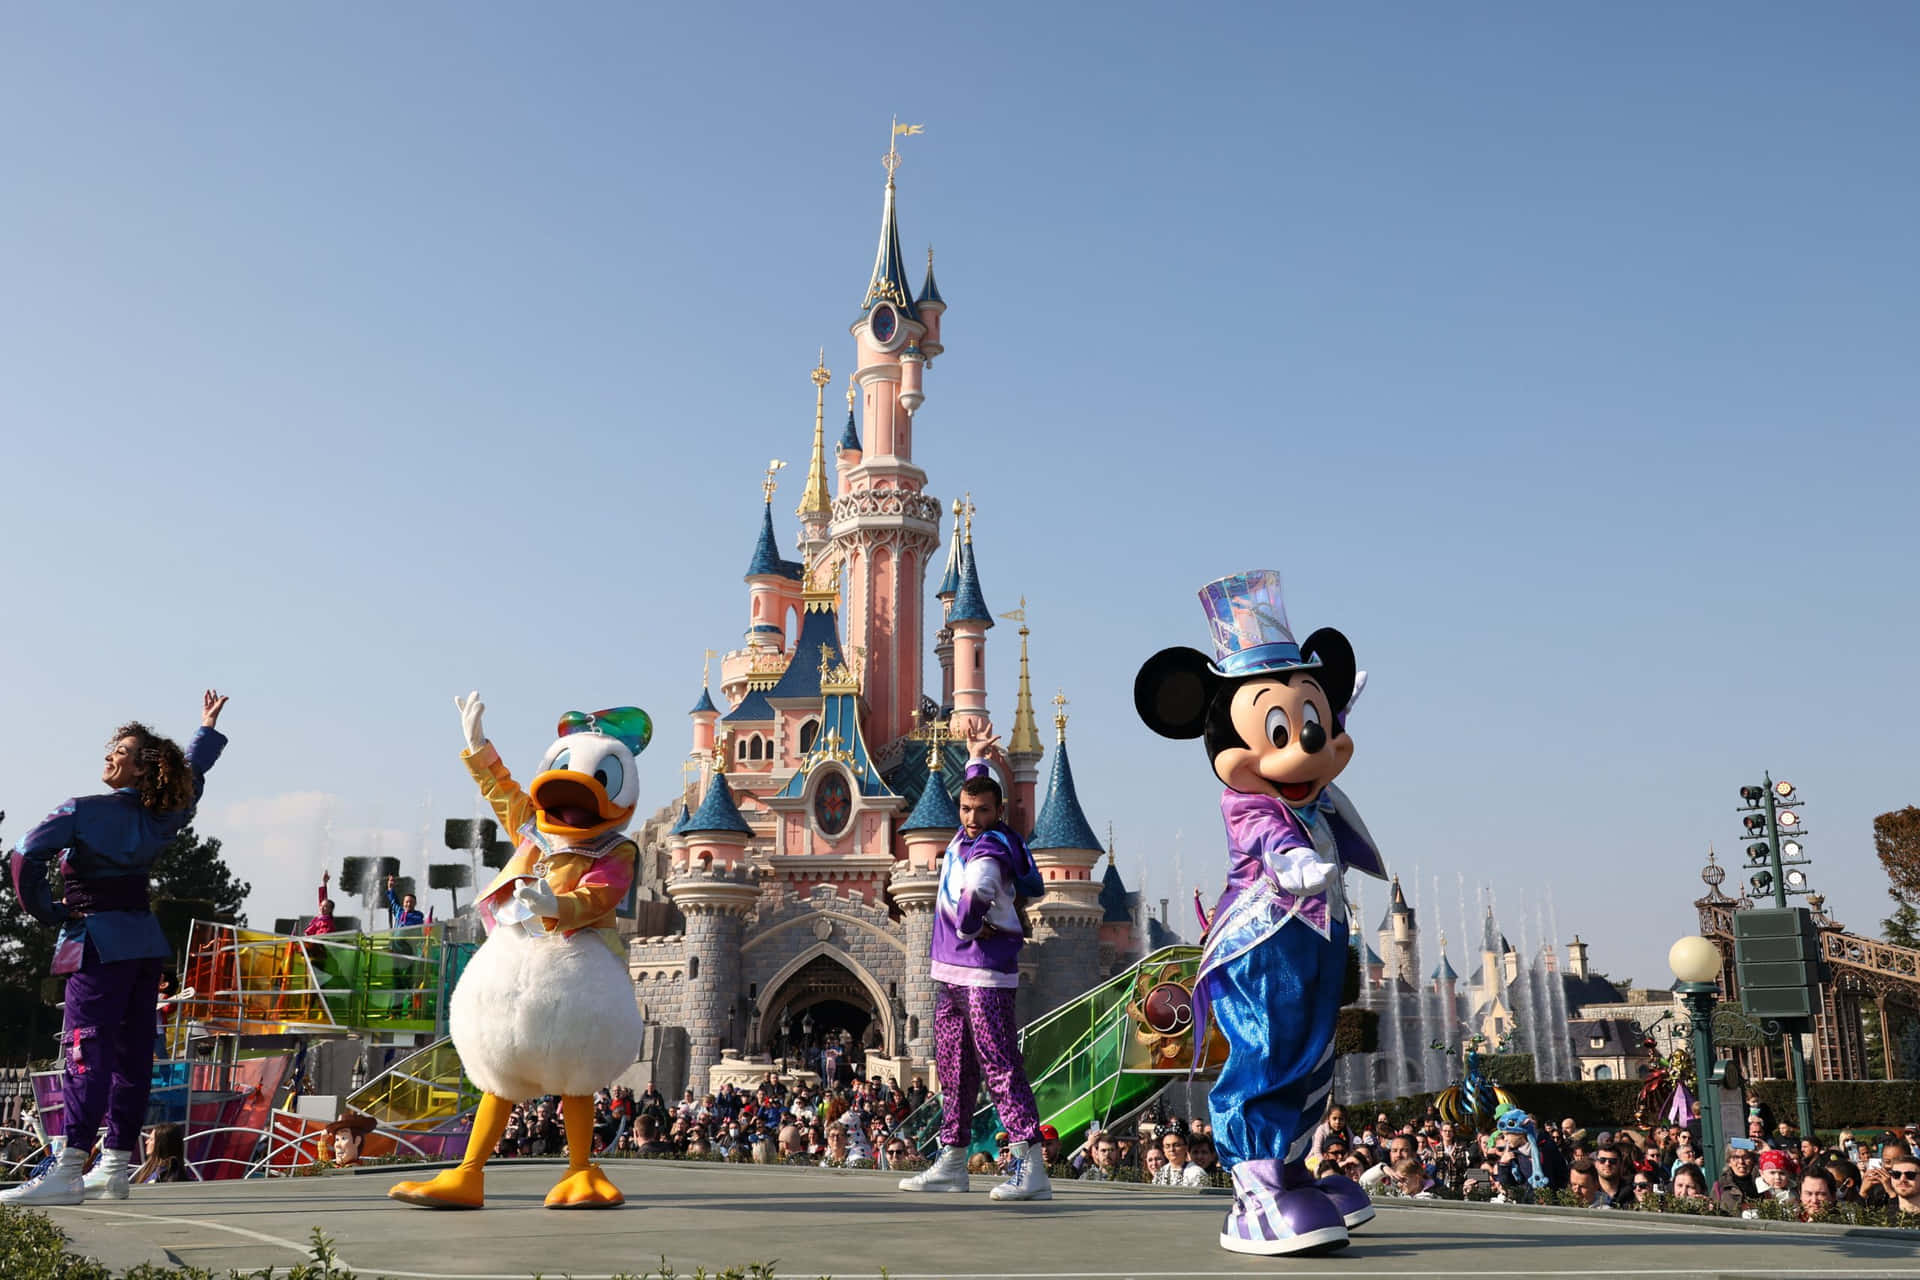 Enjoy a magical day at Disneyland with your family